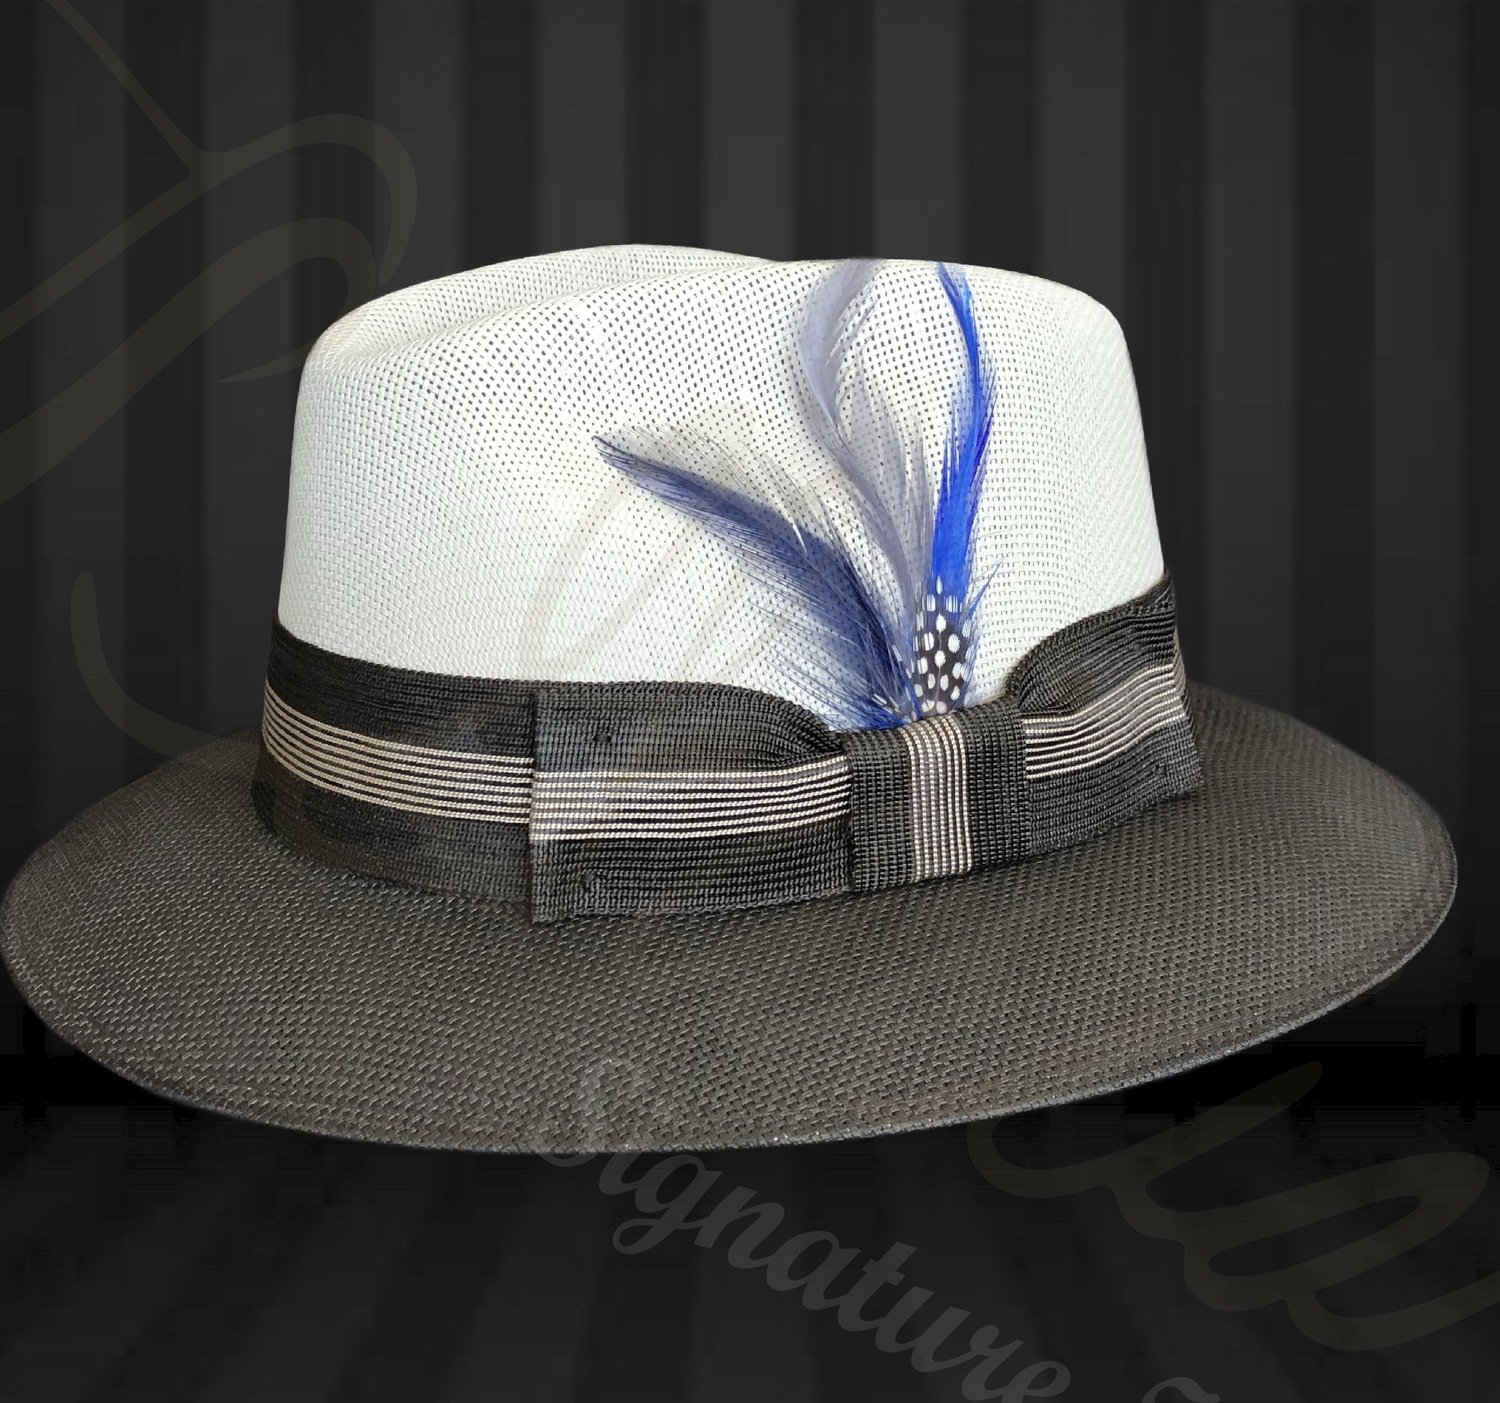 Specialty
Golden Line Two Tone Viejo Fedora Style